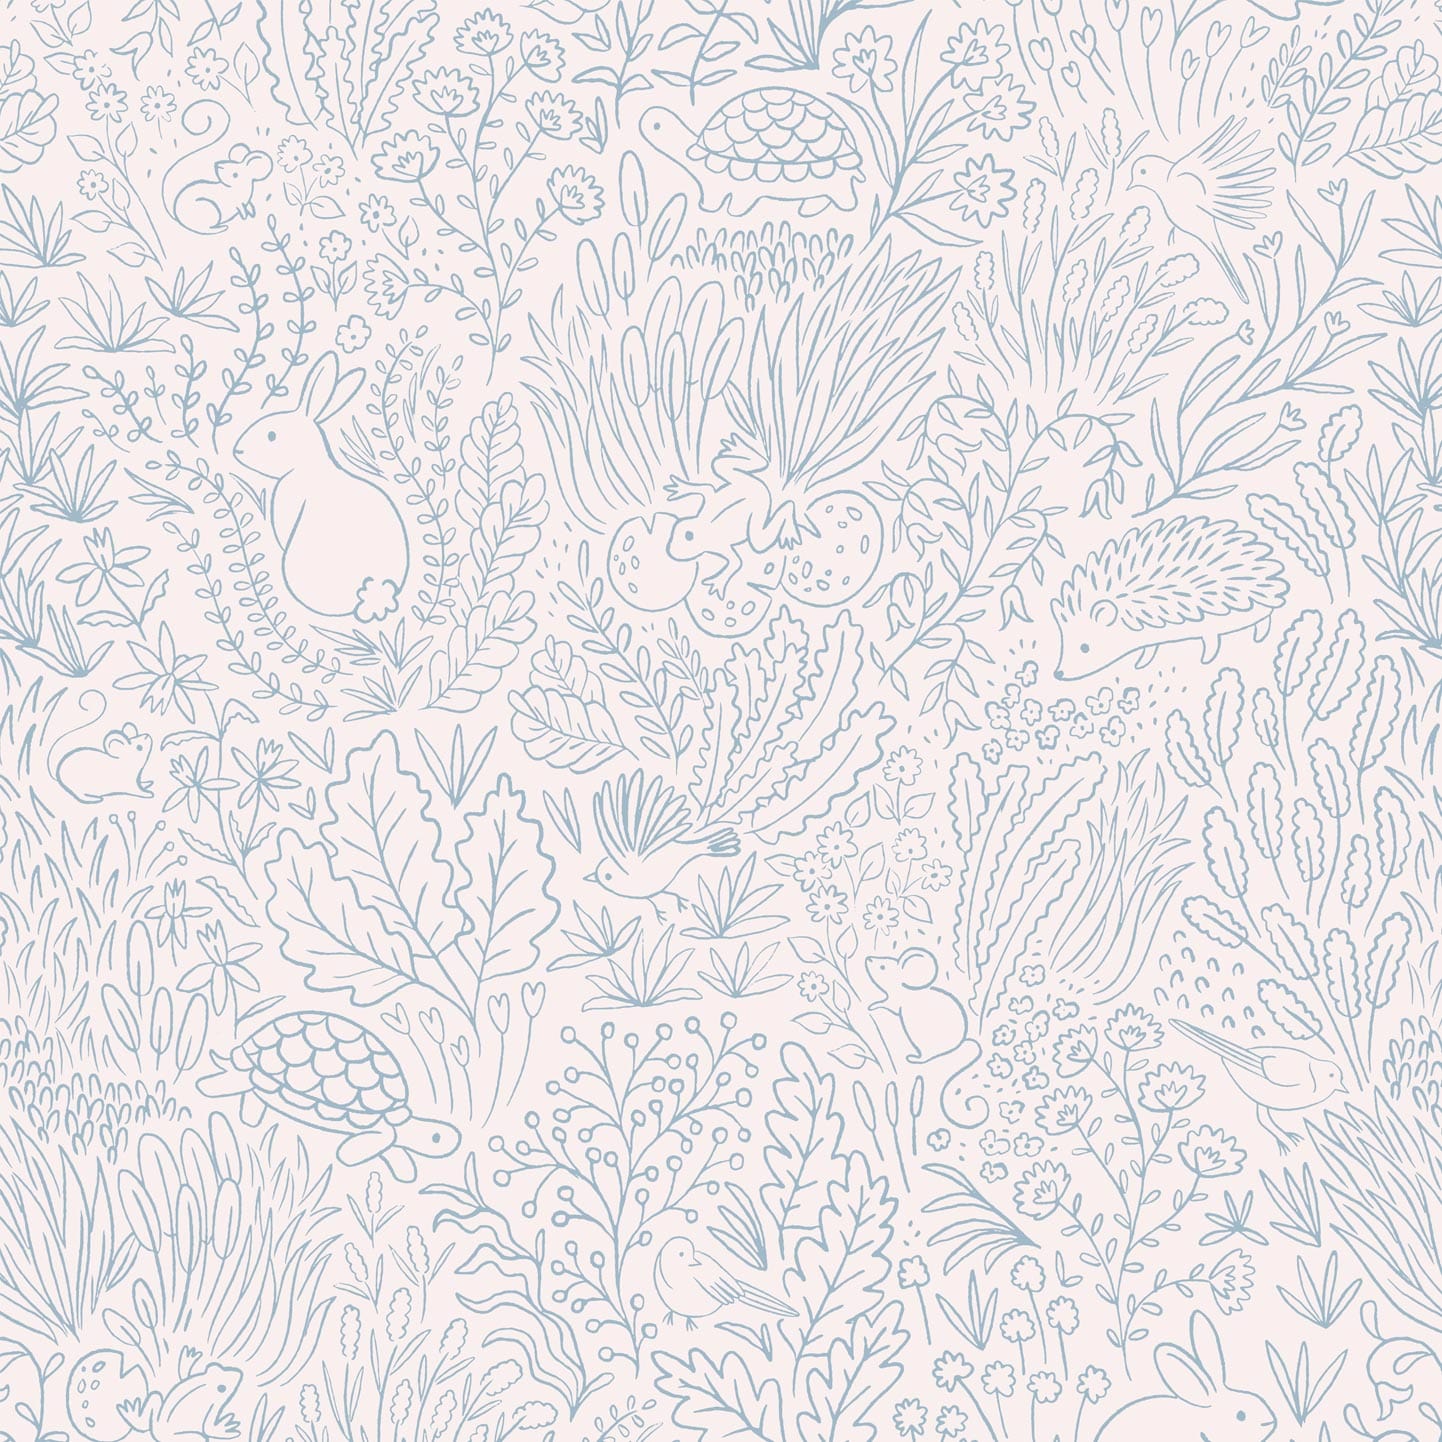 Wallpaper sample of blue line work animals and florals such as rabbits, hedgehogs, frogs, tortoise, mice and birds. 